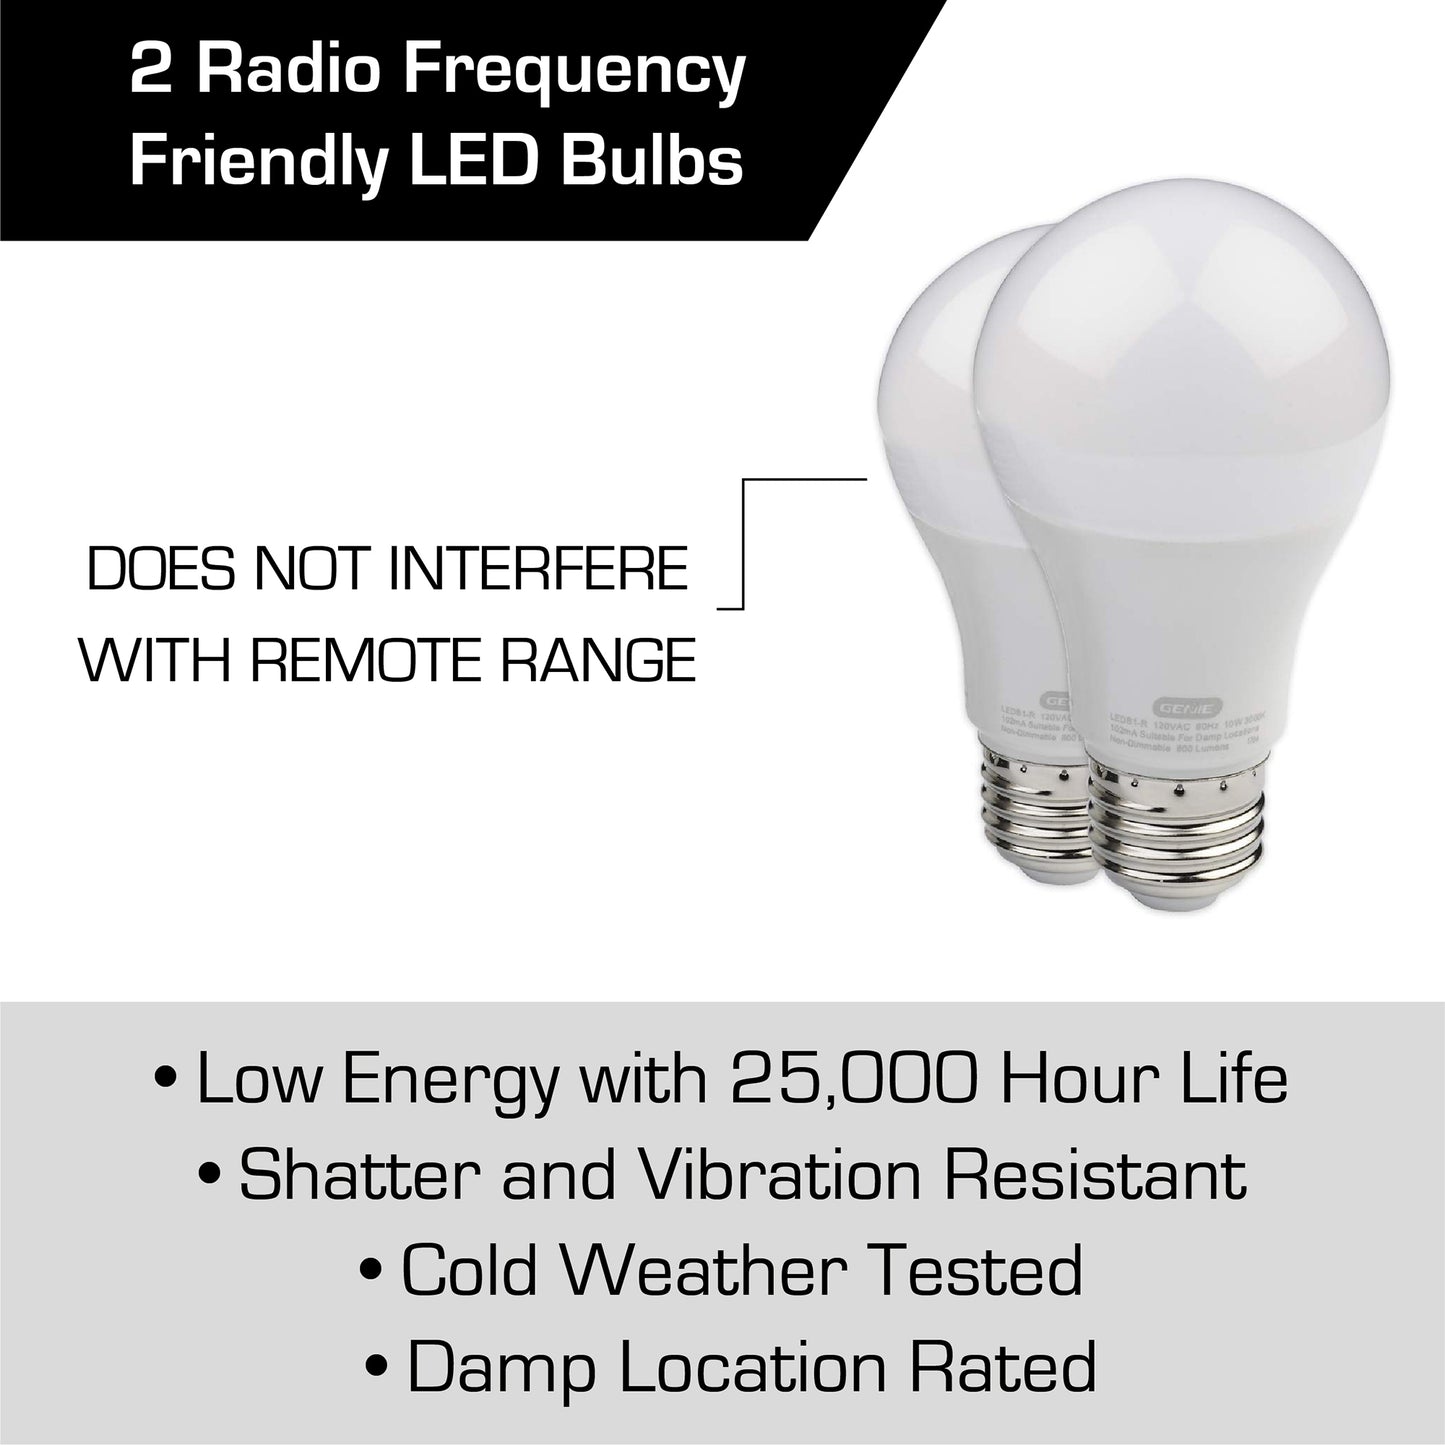 2 LED light bulbs rated for garage door openers